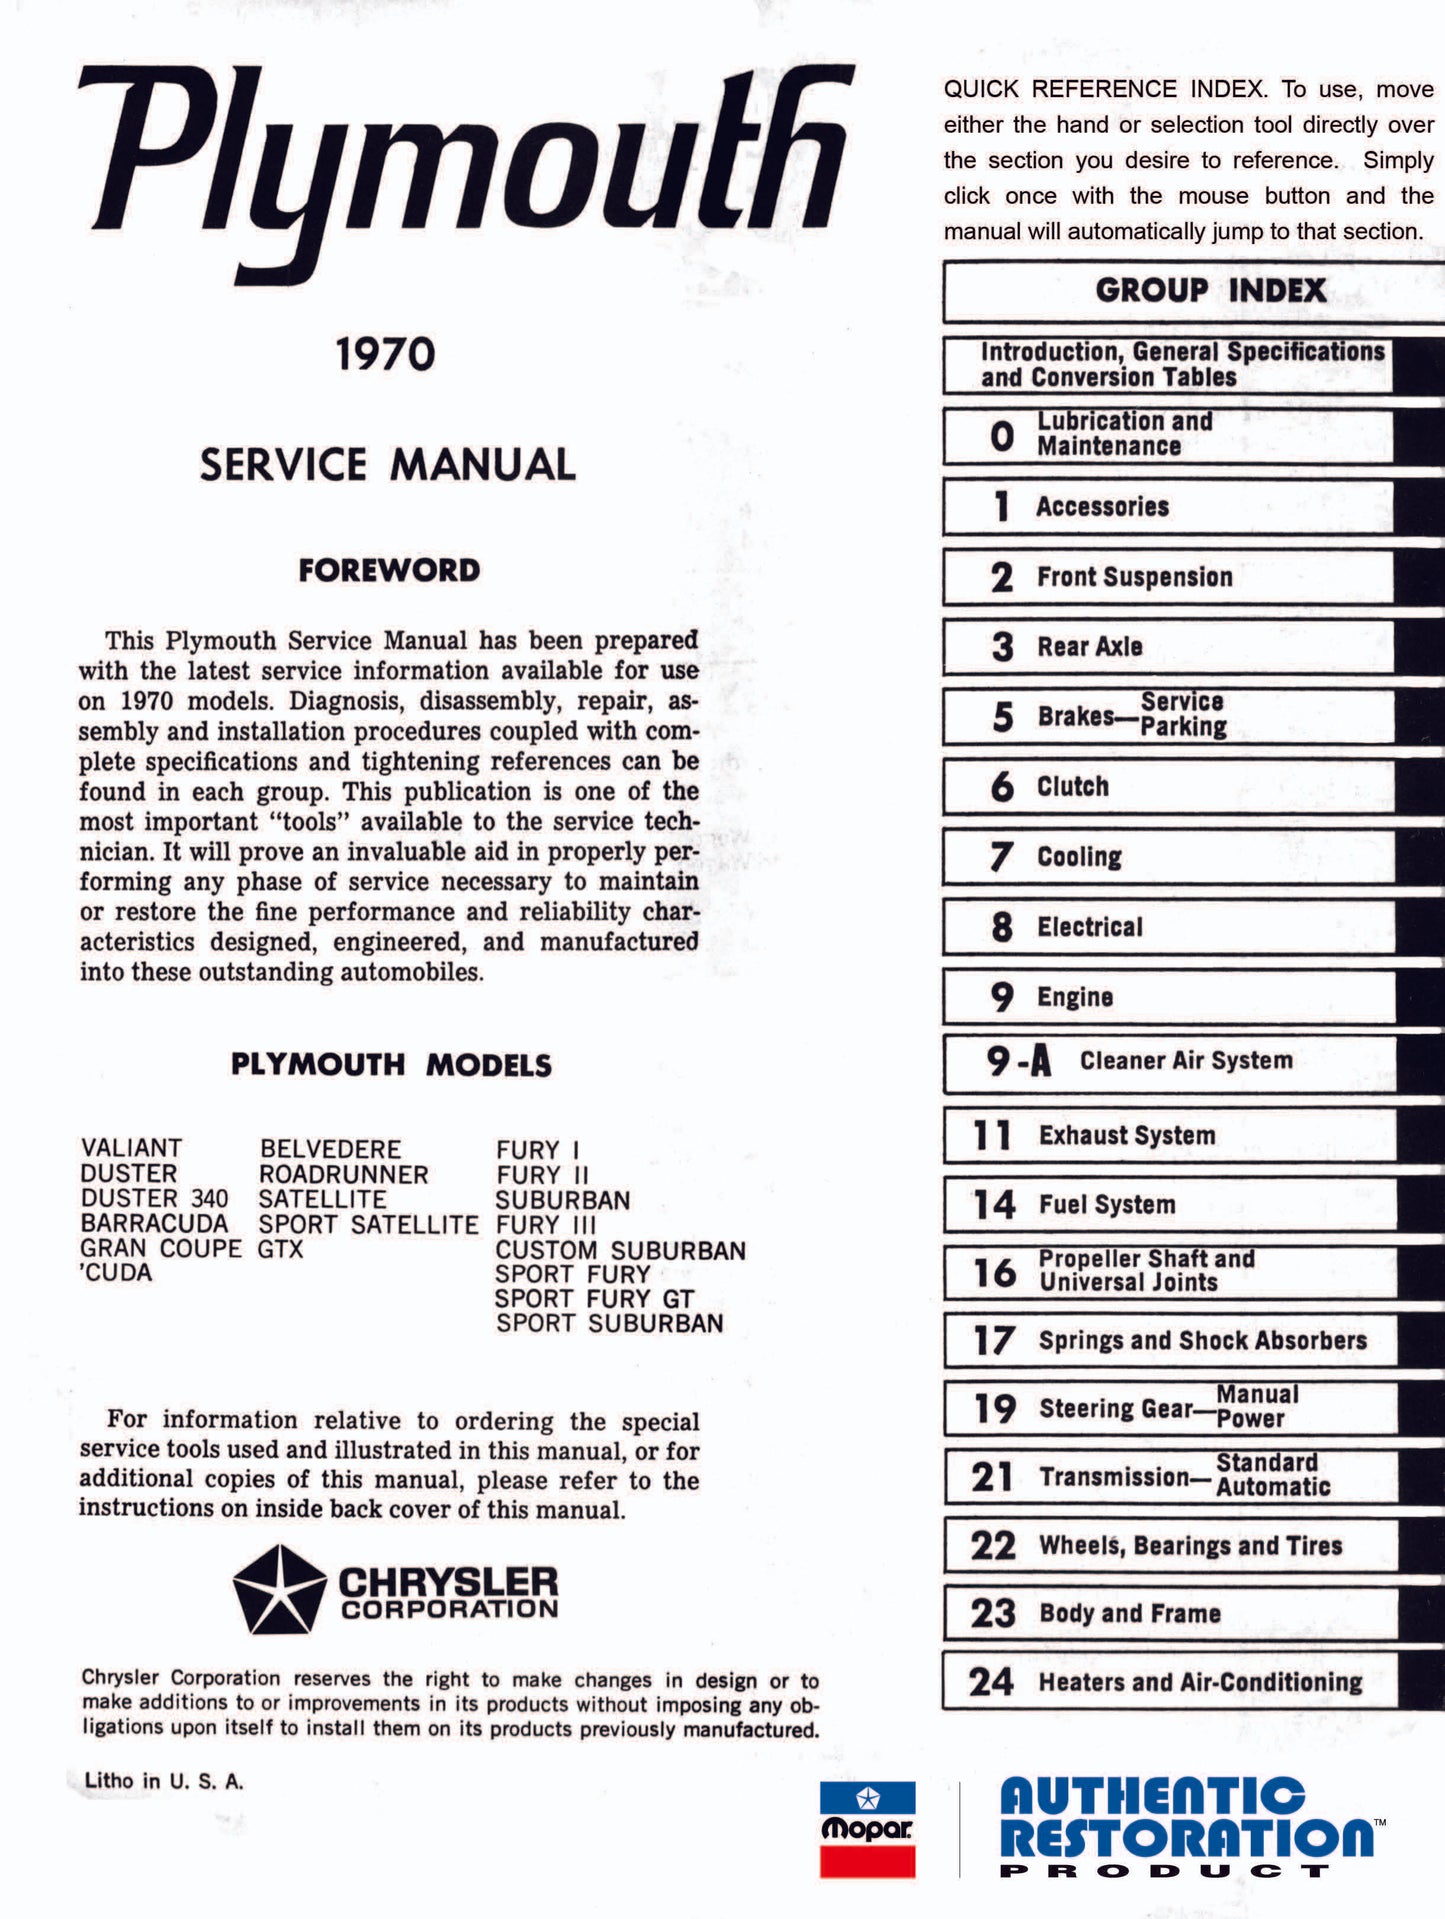 1970 Plymouth Shop Manual For - All Models